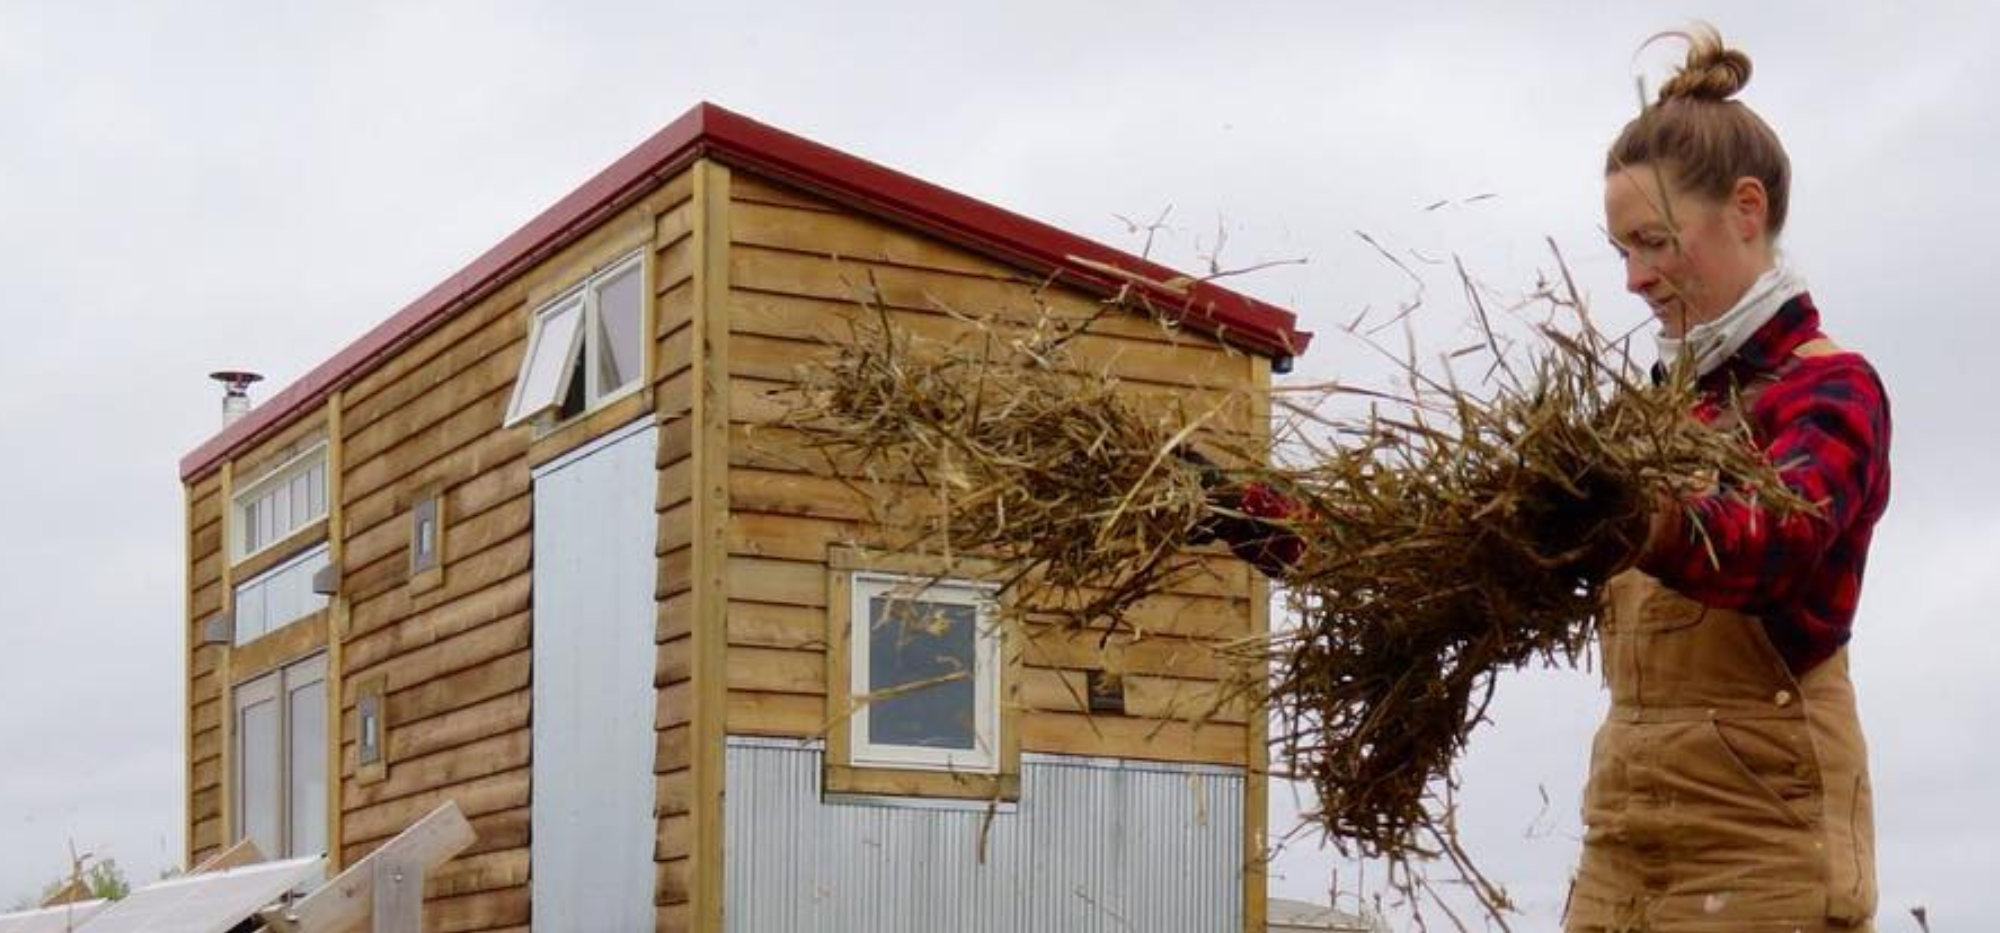 Real-life Humanure experience – Lucas’ off-grid Tiny House